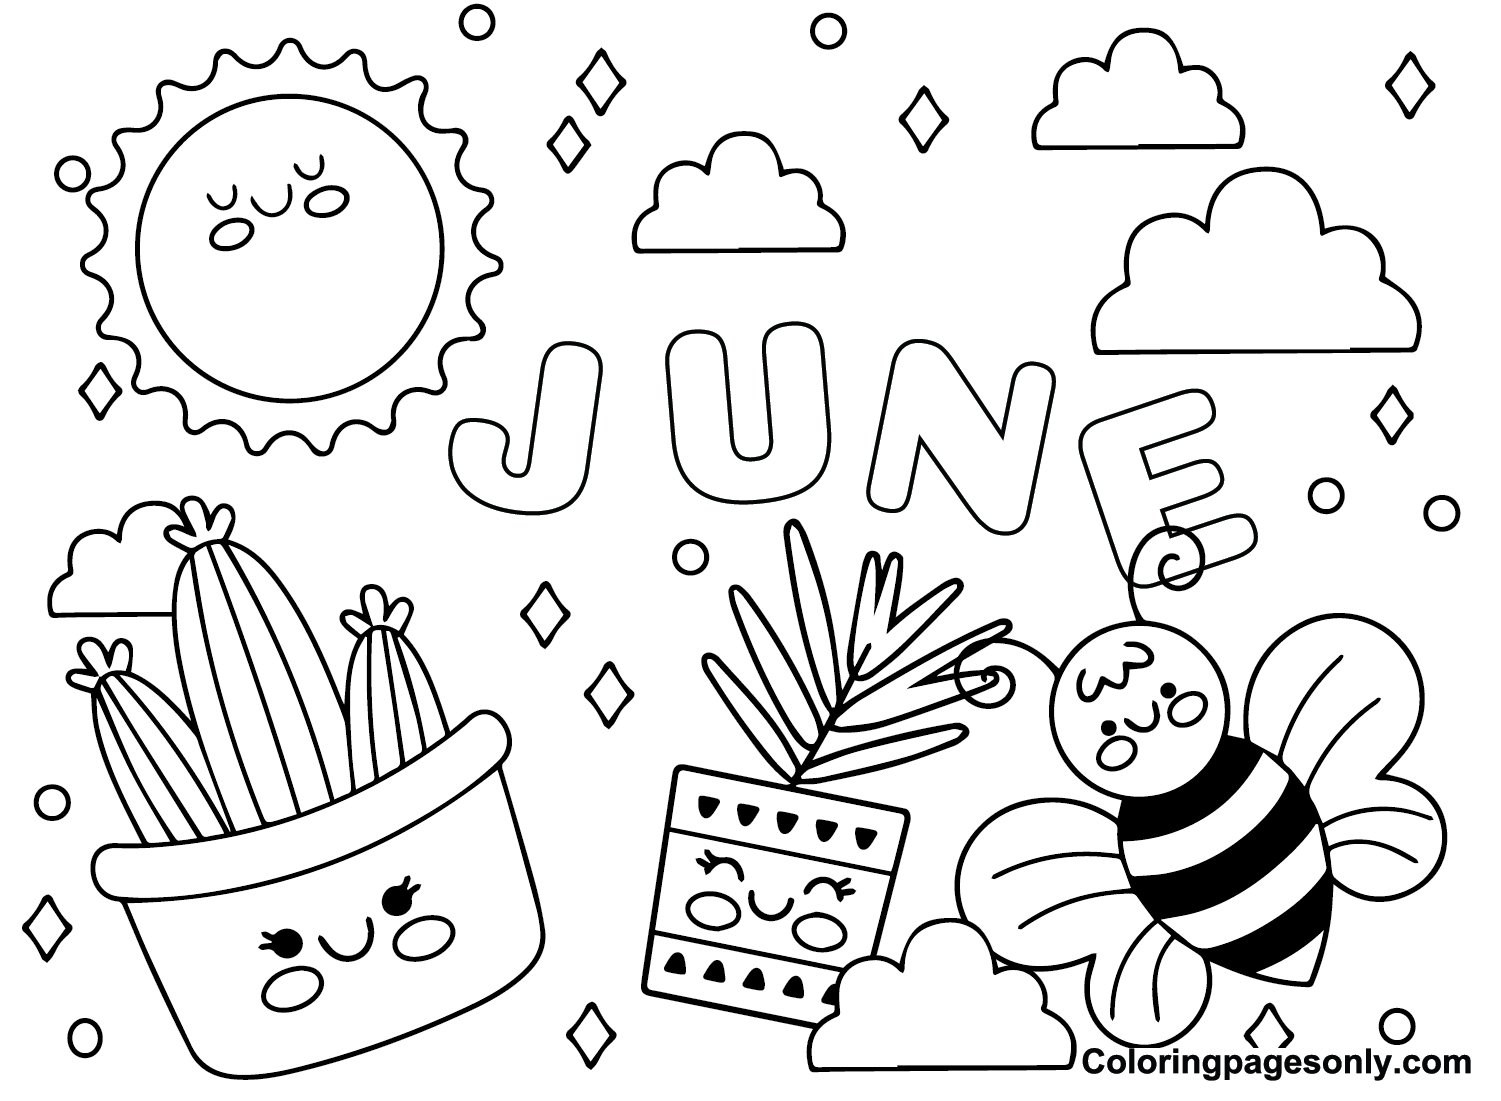 Print June Coloring Page - Free Printable Coloring Pages